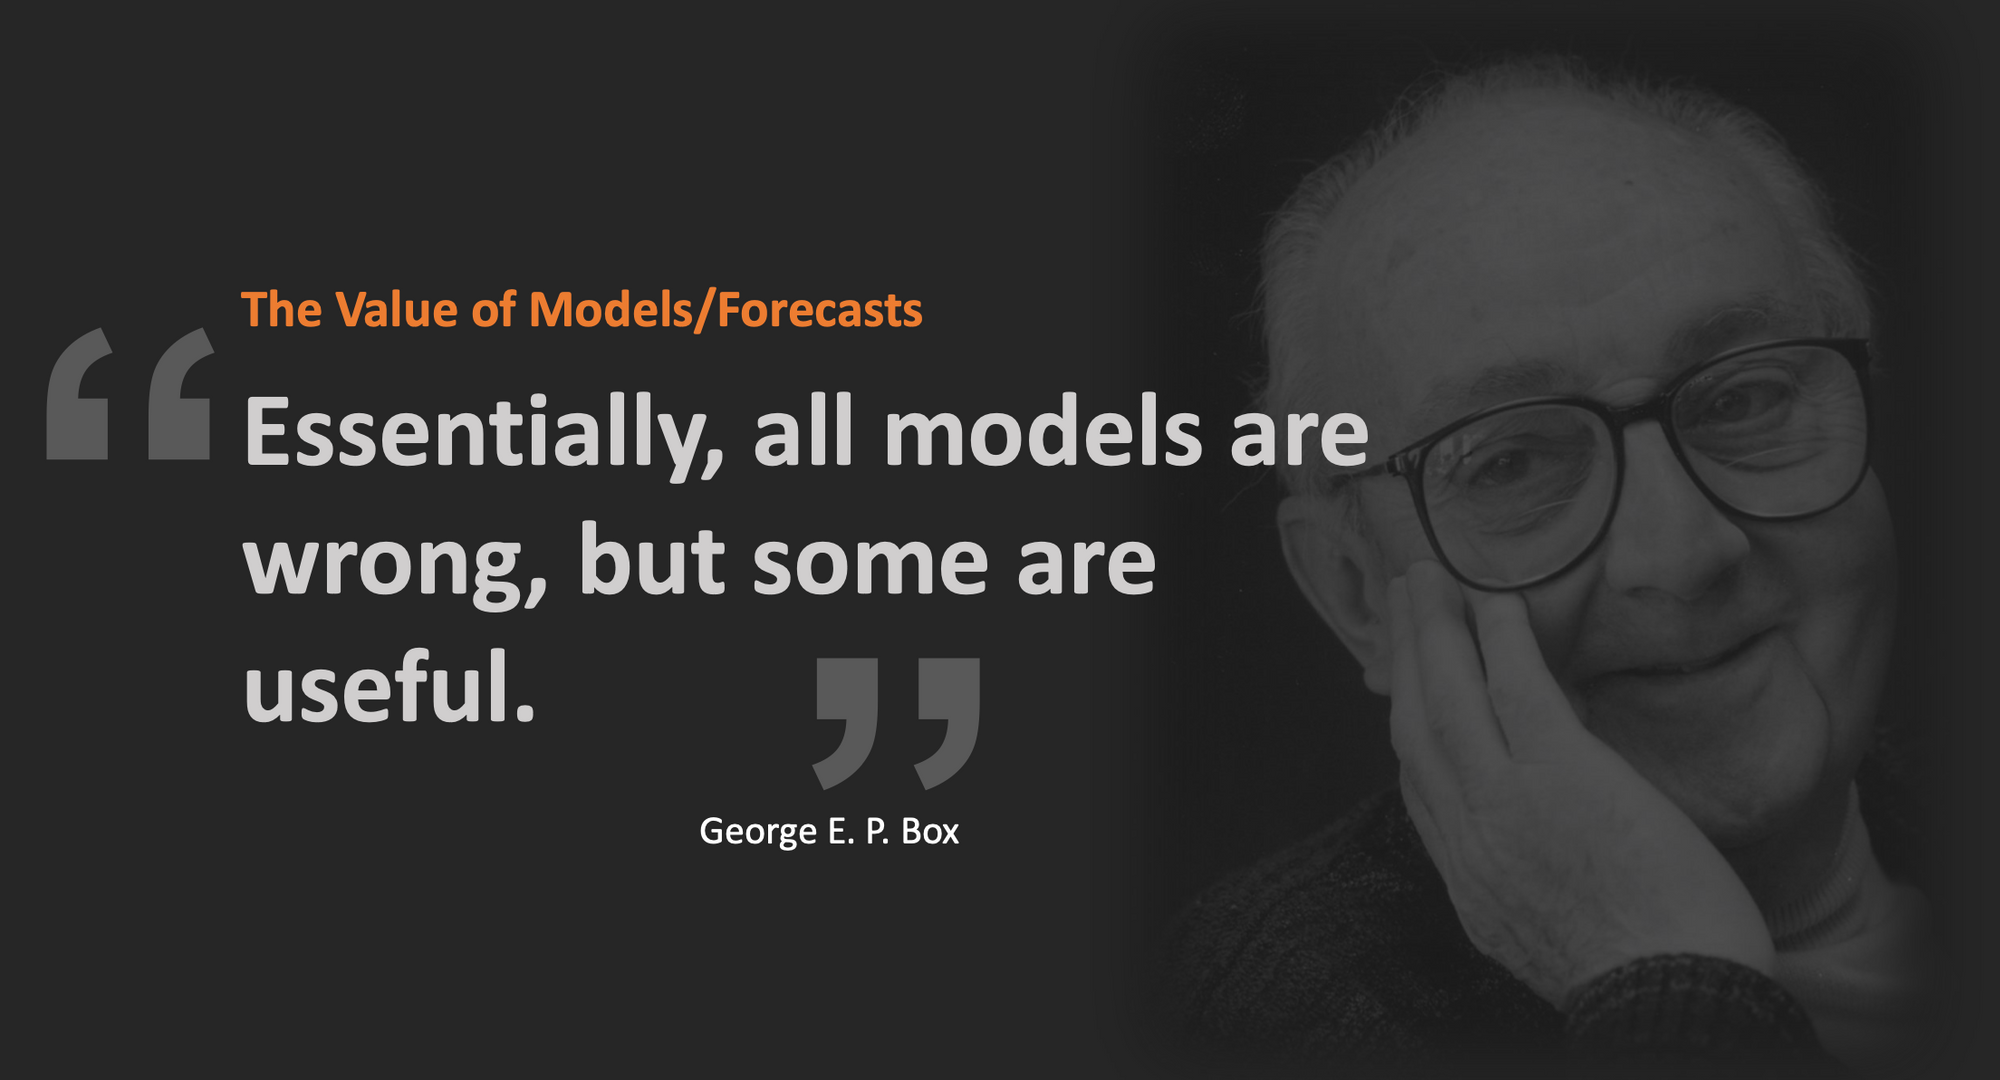 George E.P.Box quote - "Essentially, all models are wrong, but some are useful."